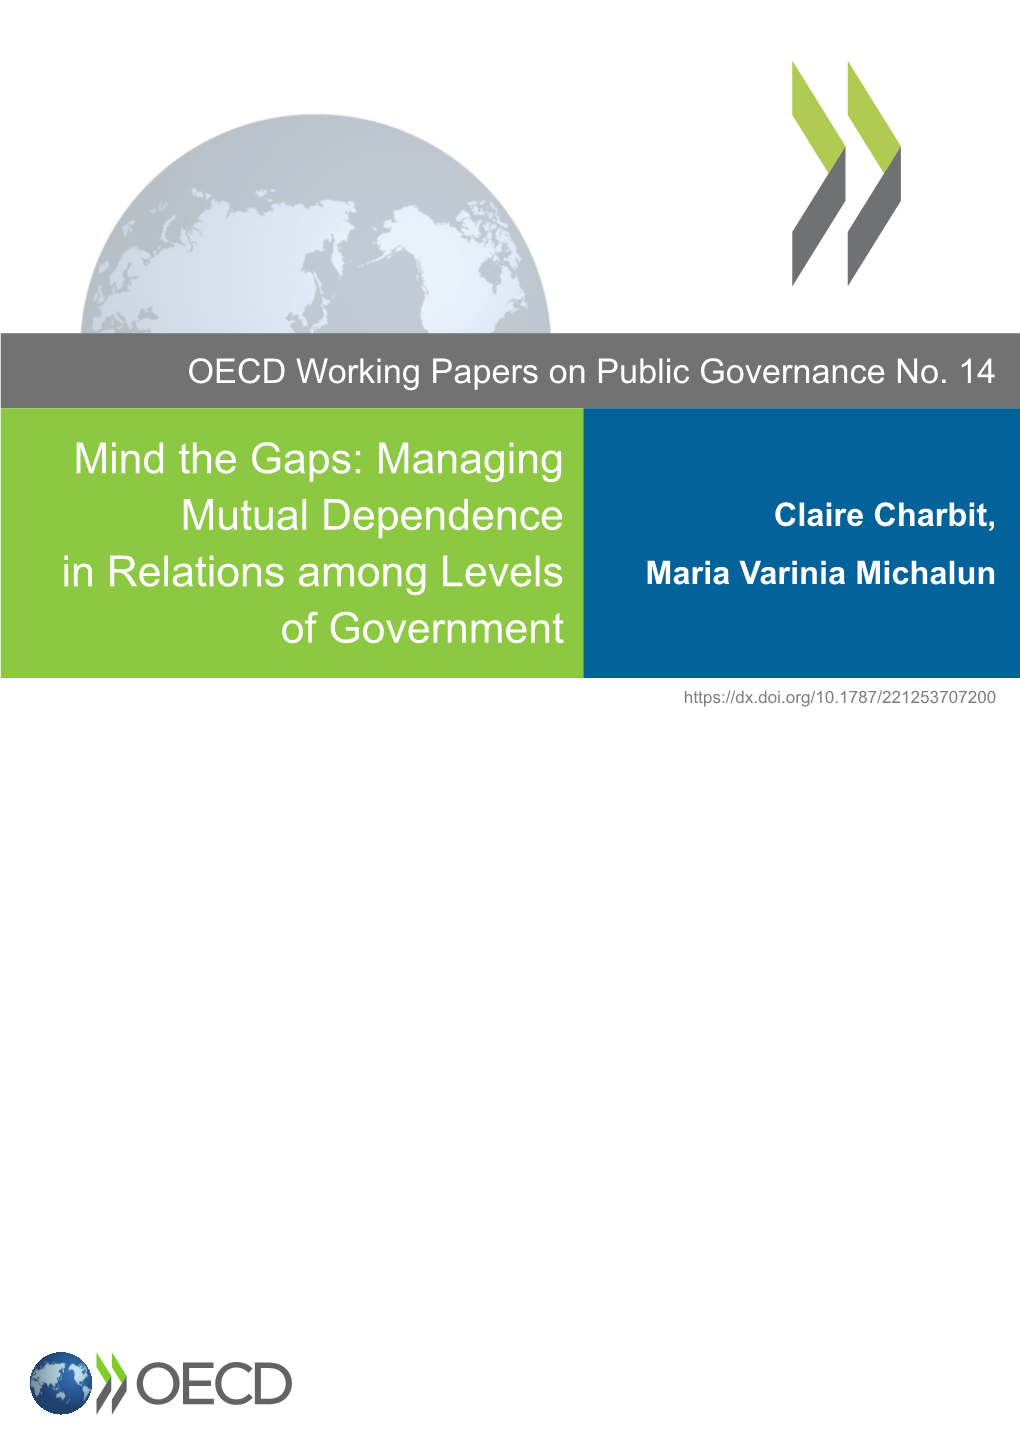 Mind the Gaps: Managing Mutual Dependence in Relations Among Levels of Government